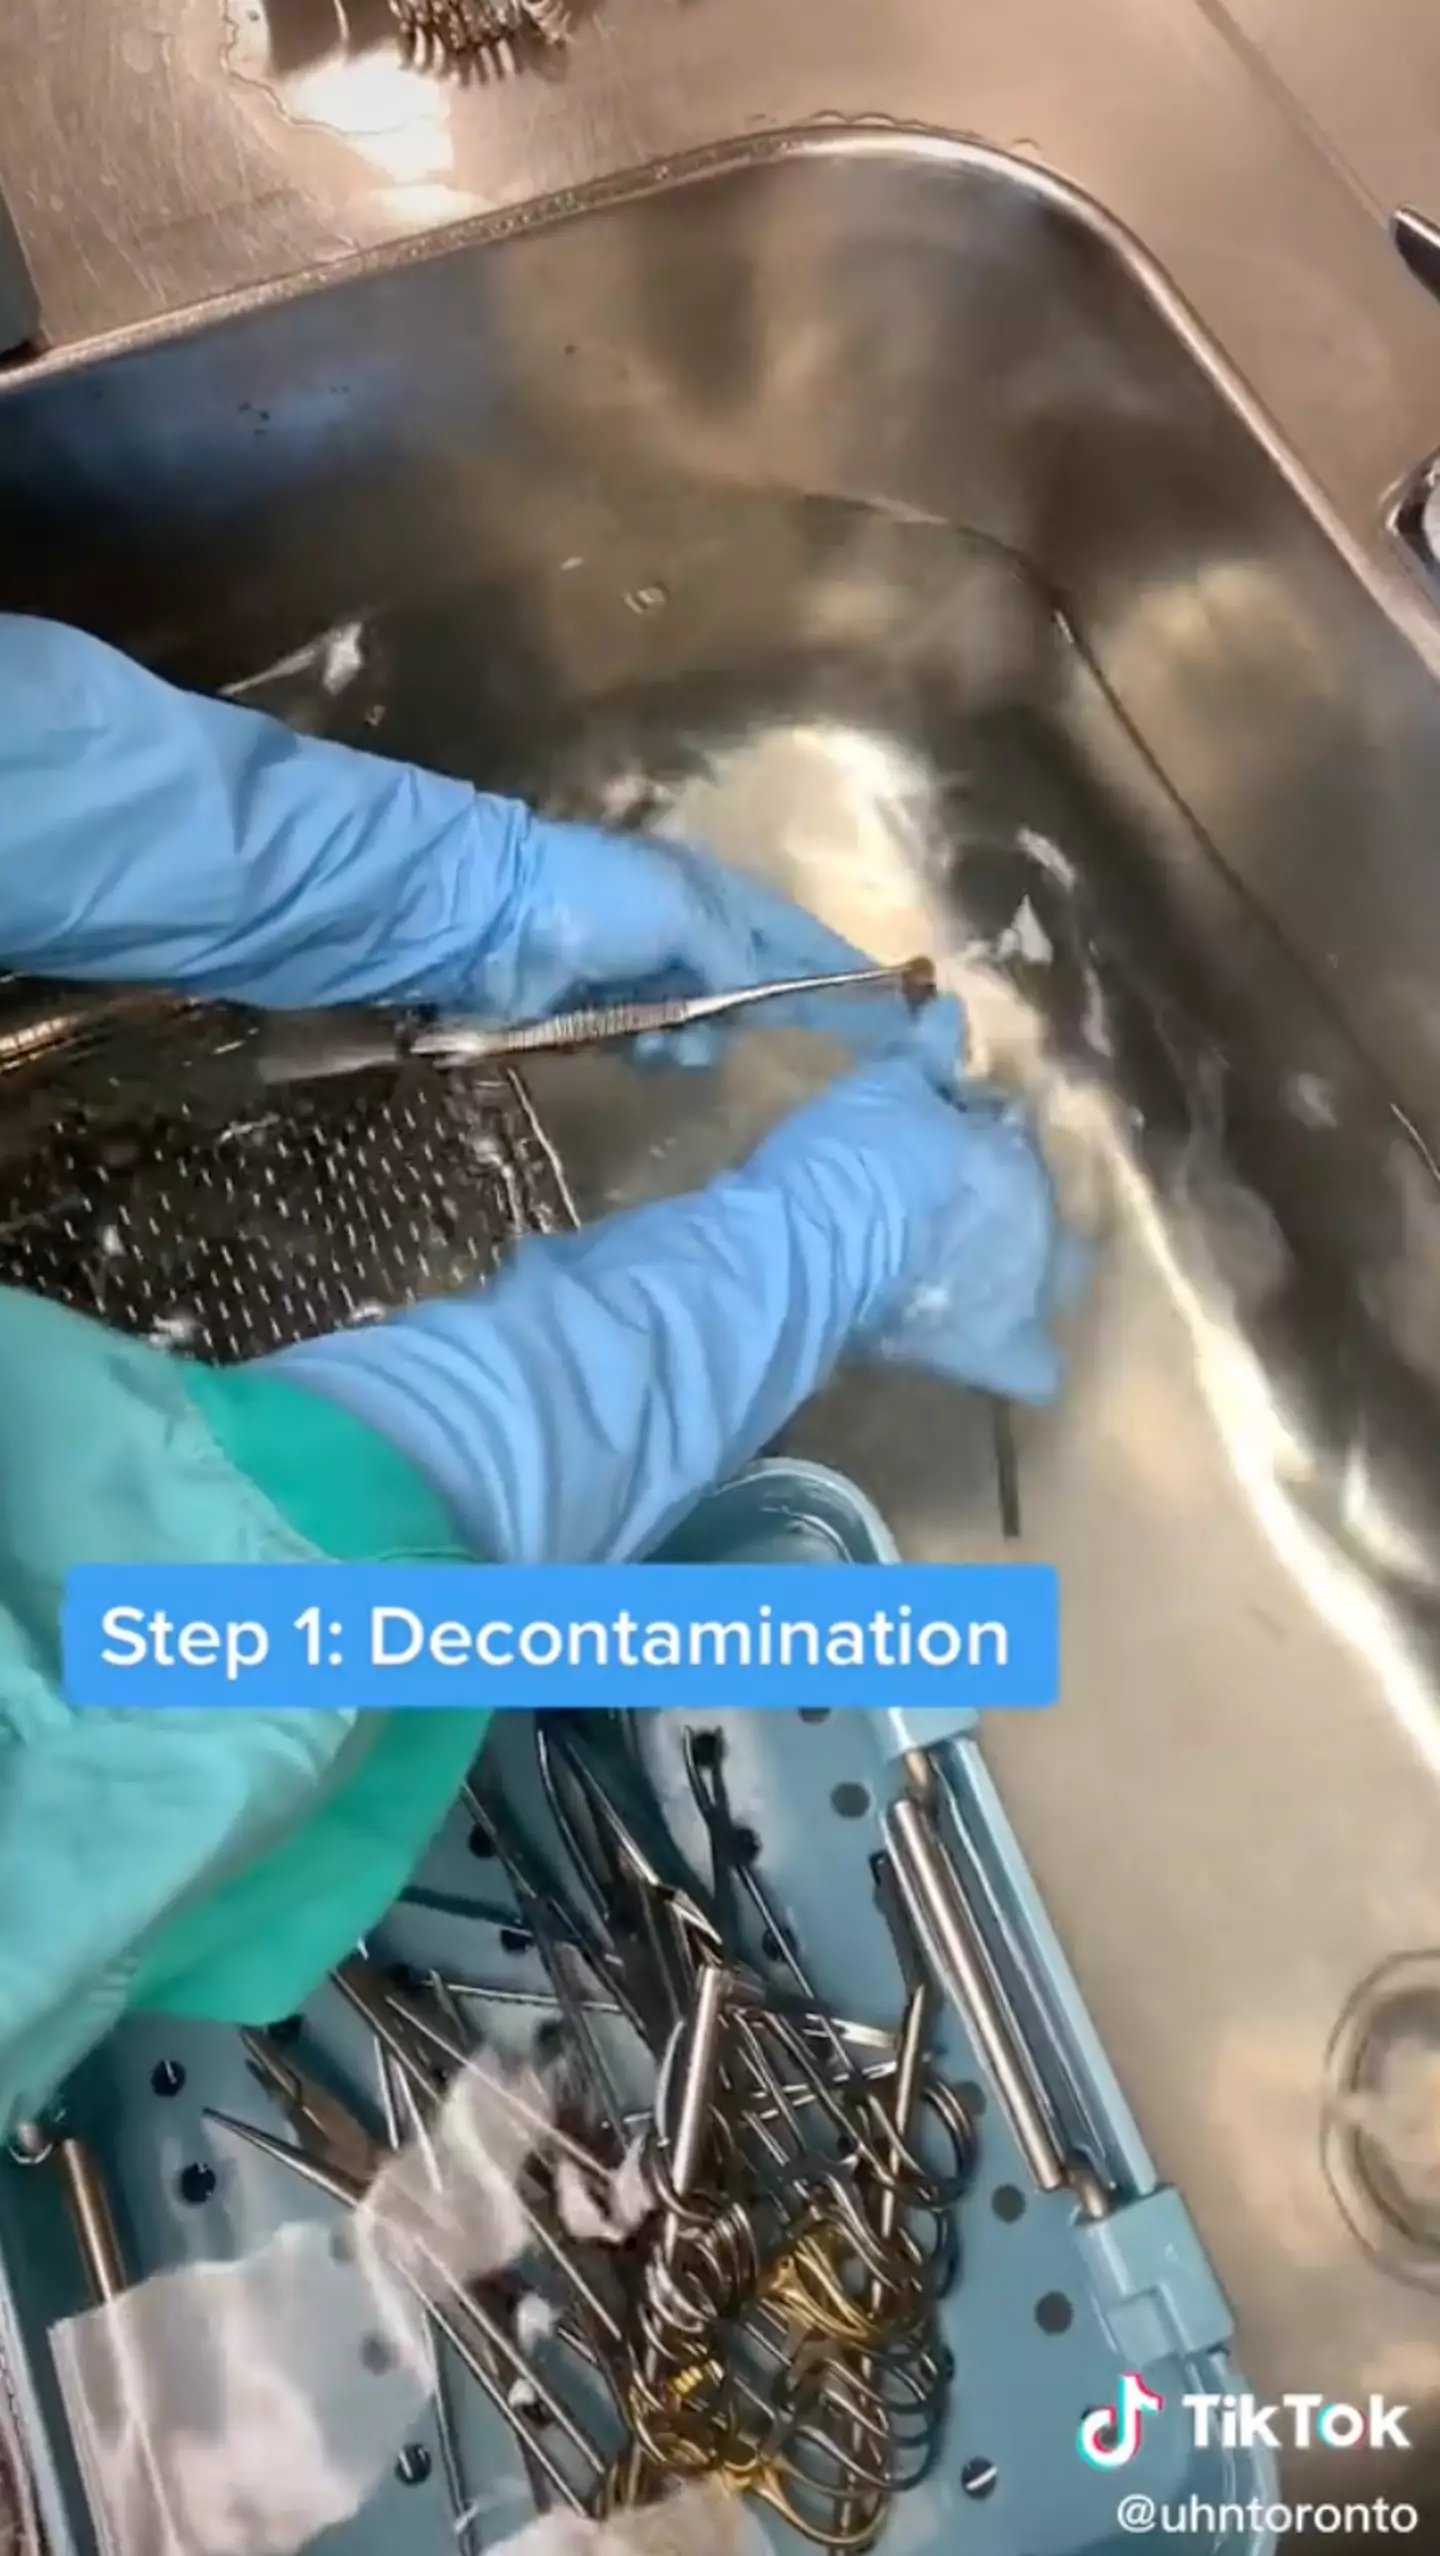 The first stage is decontamination.